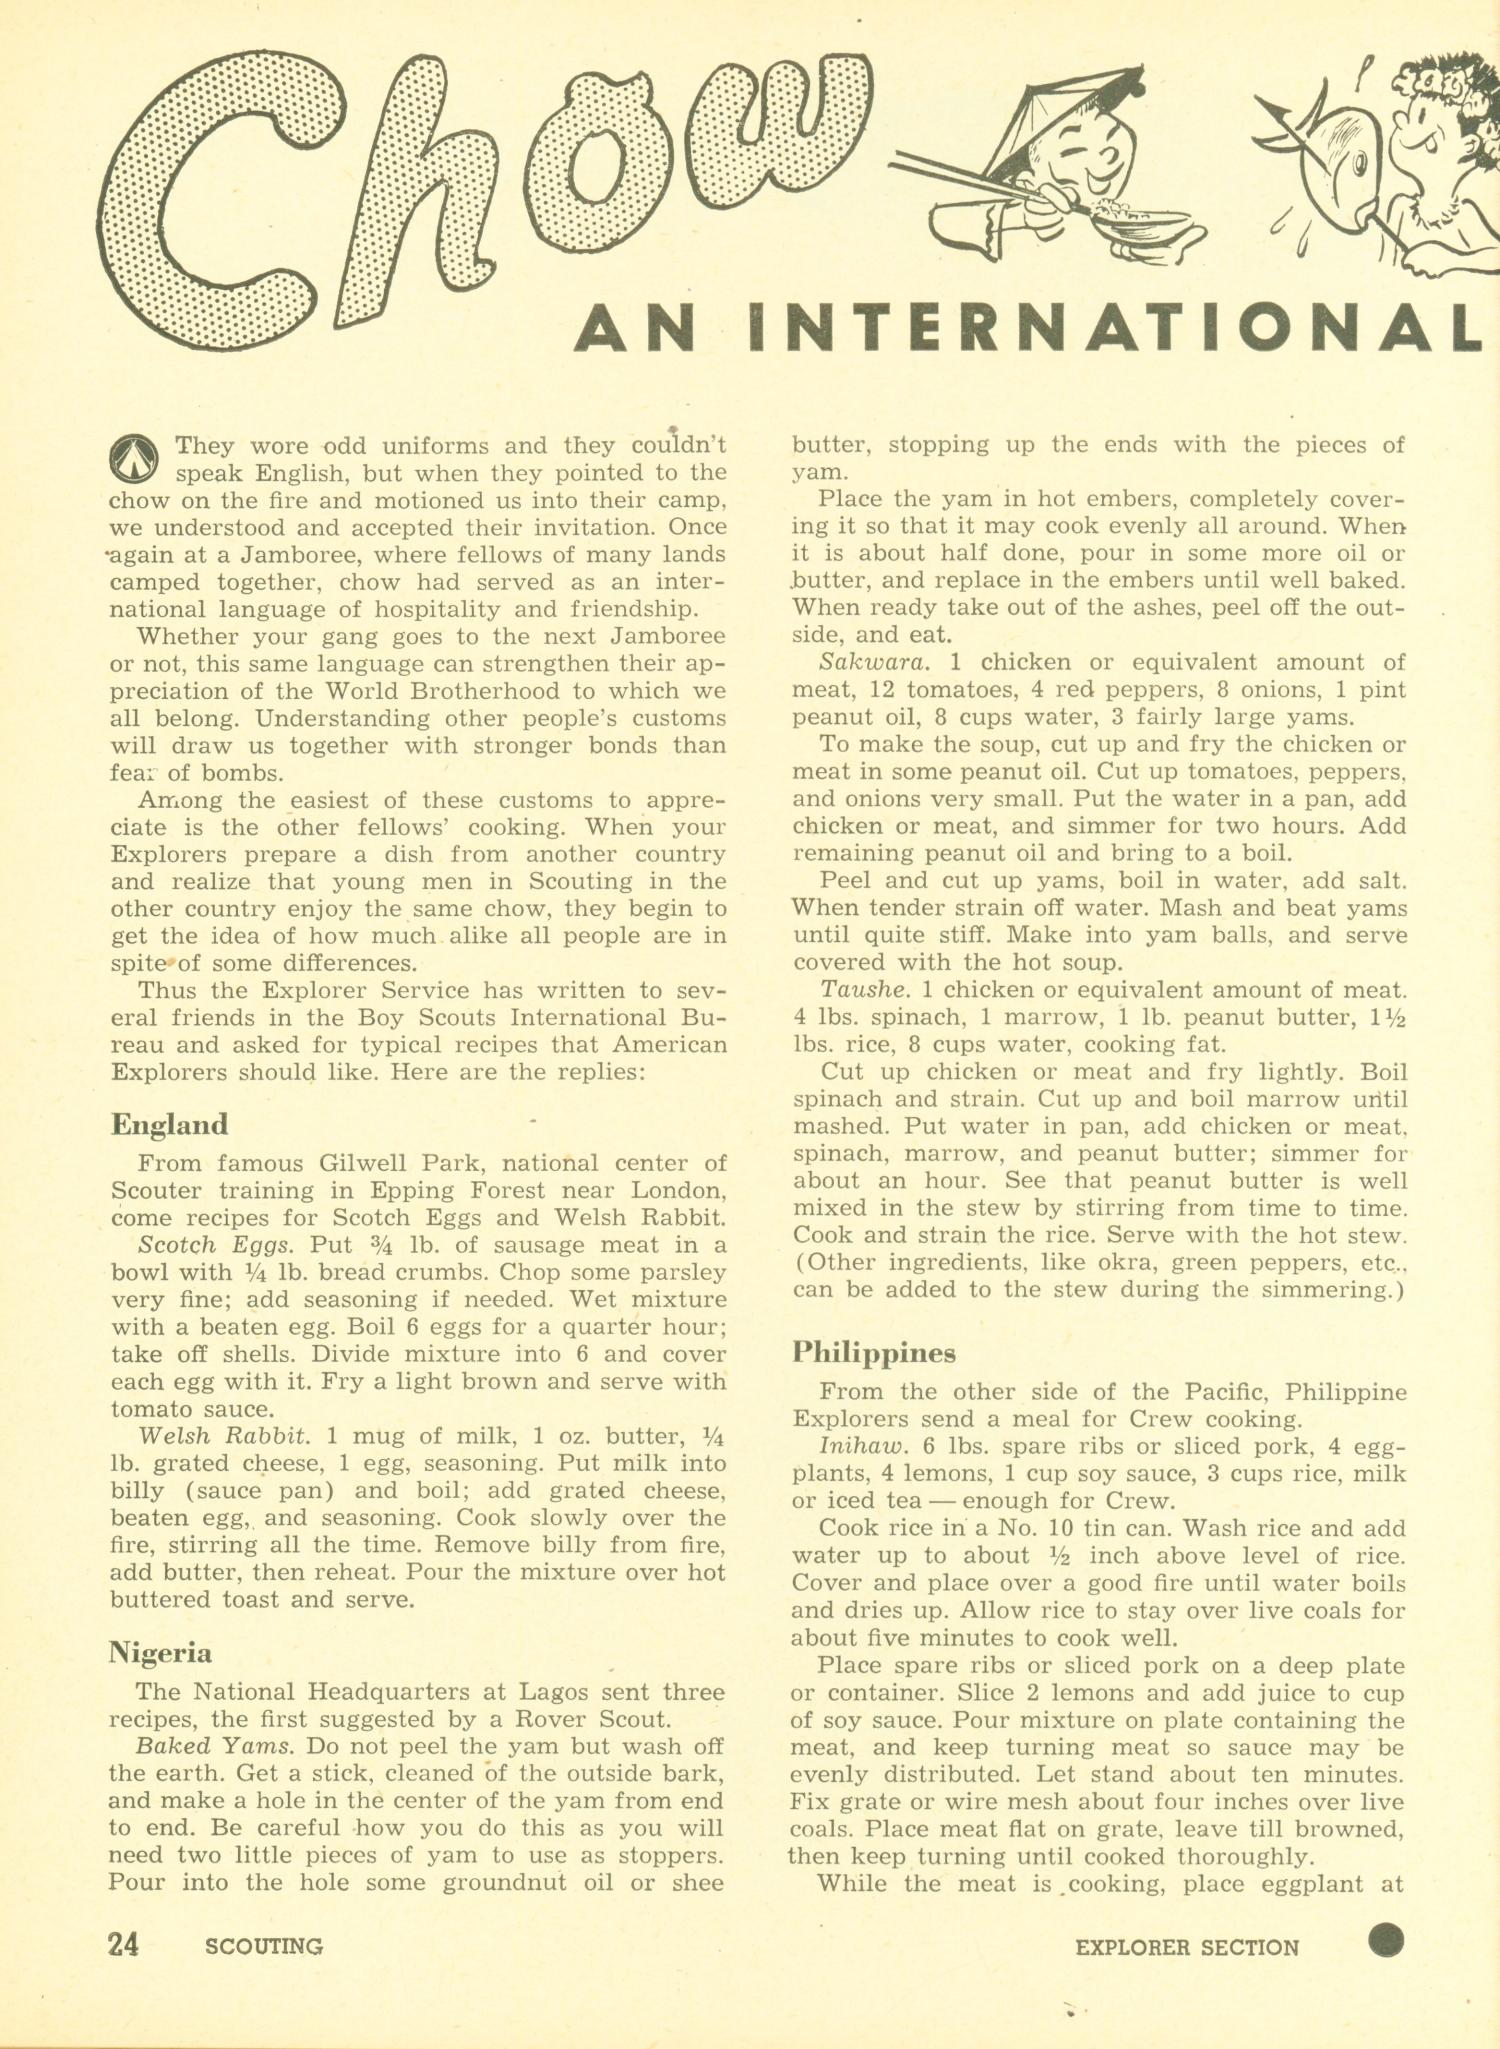 Scouting, Volume 39, Number 3, March 1951
                                                
                                                    24
                                                